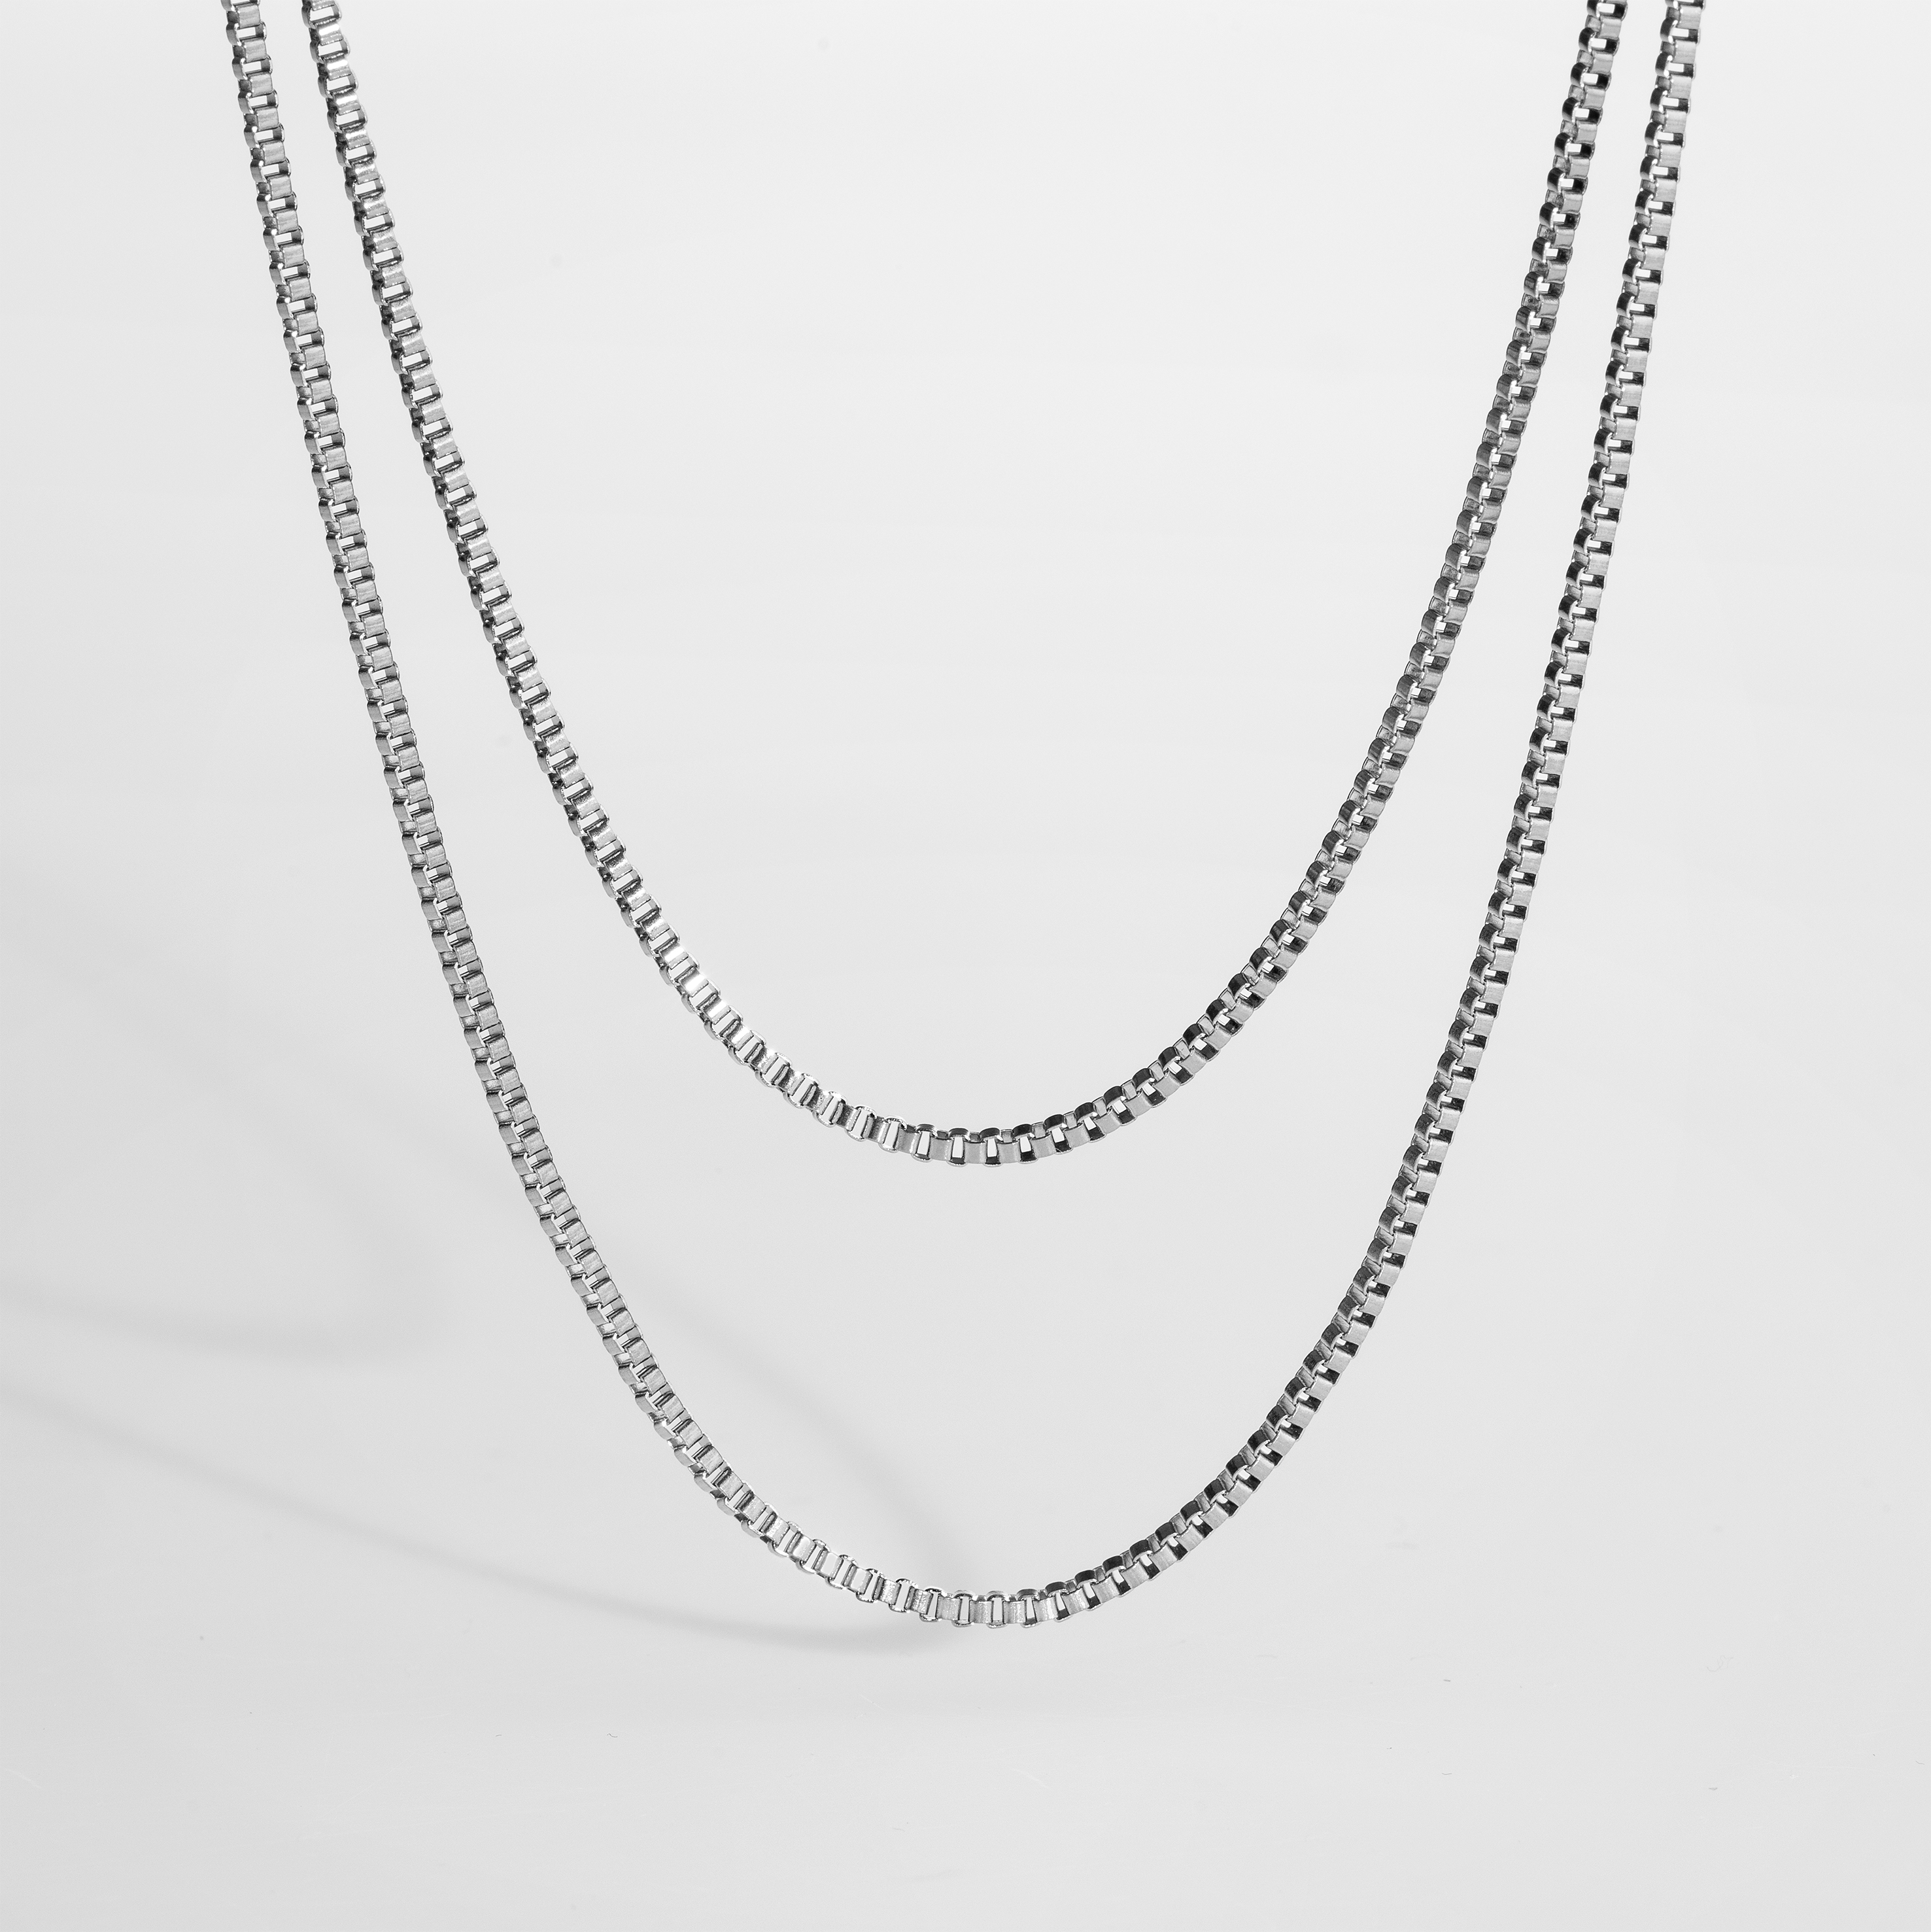 NL Double Chain - Silver - All necklaces - Northern Legacy